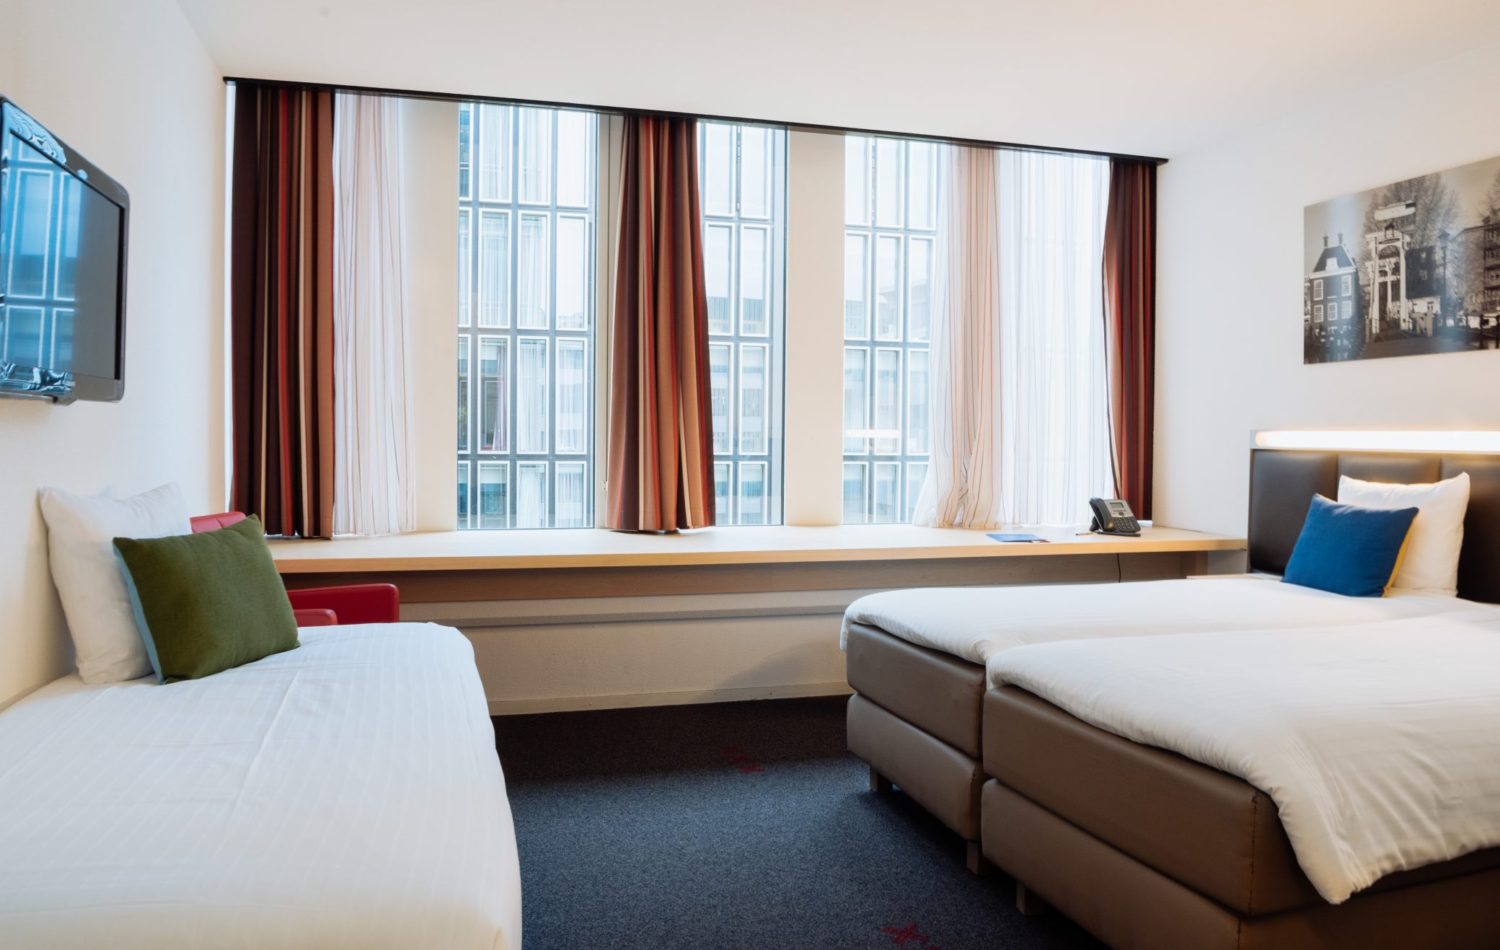 Triple Room in Hotel Casa Amsterdam with 3 separate beds, desk and television